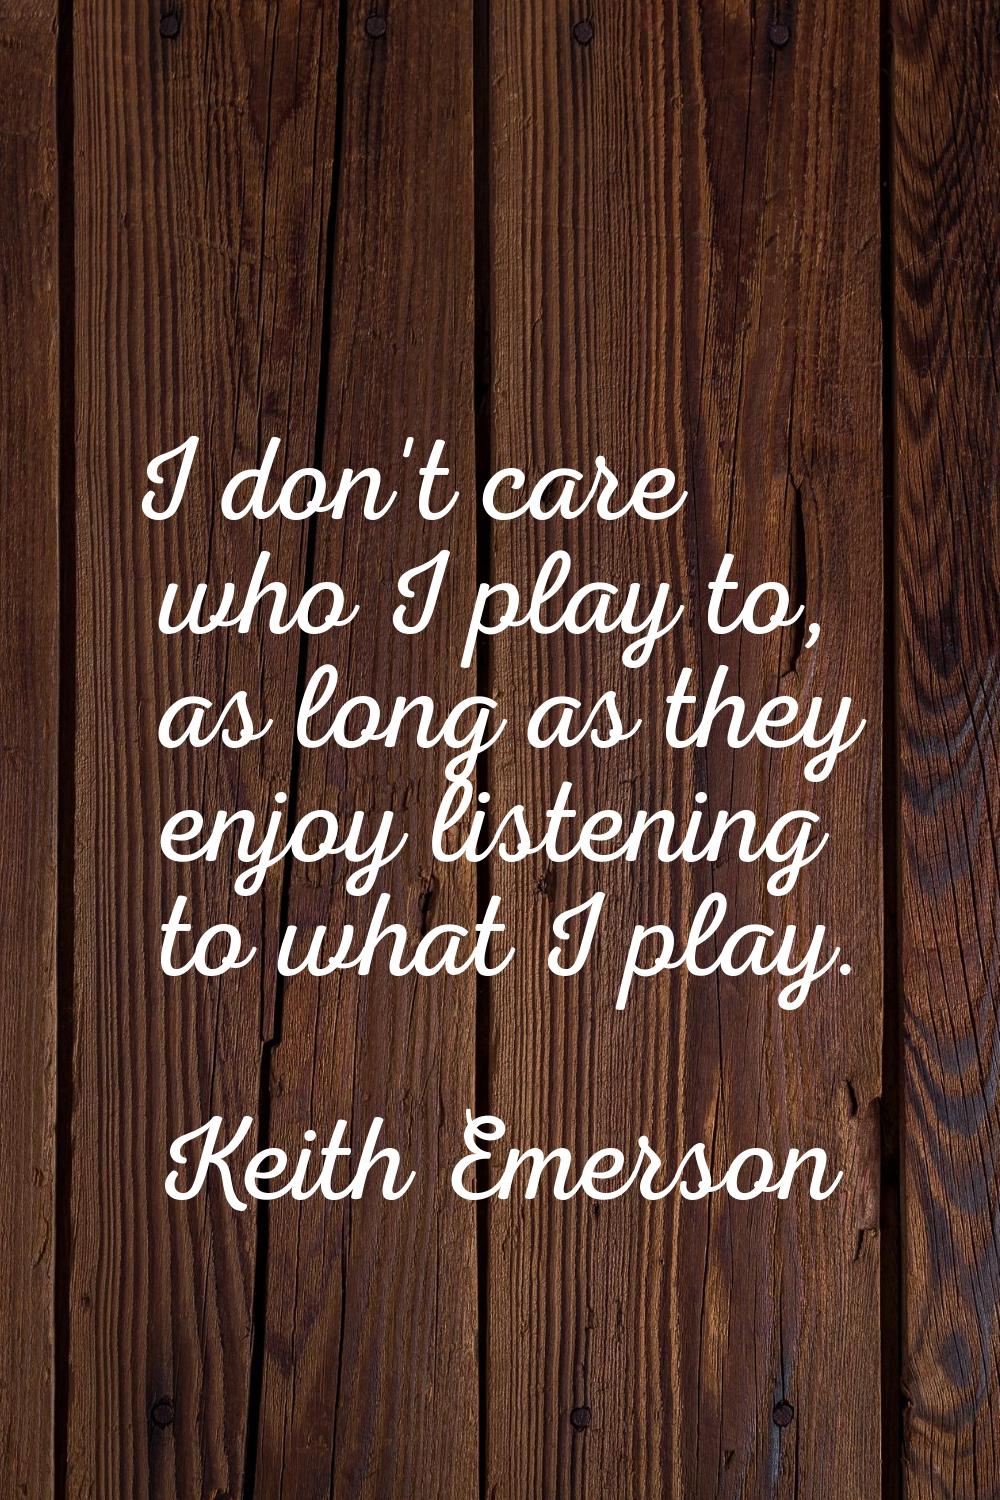 I don't care who I play to, as long as they enjoy listening to what I play.